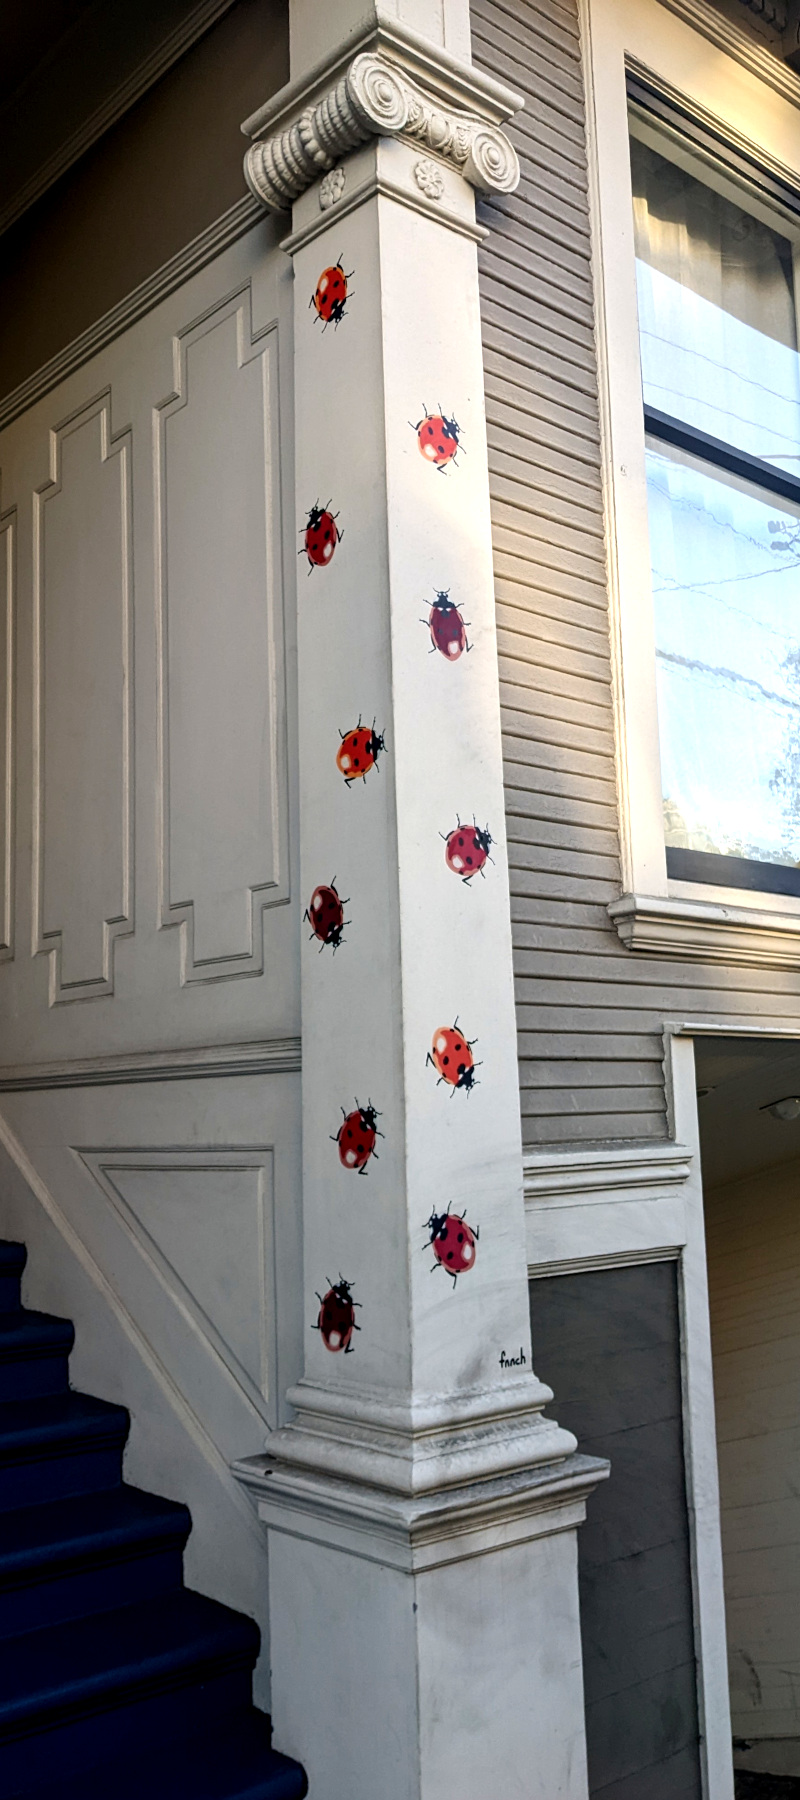 [photo: building column decorated with painted-on ladybugs]